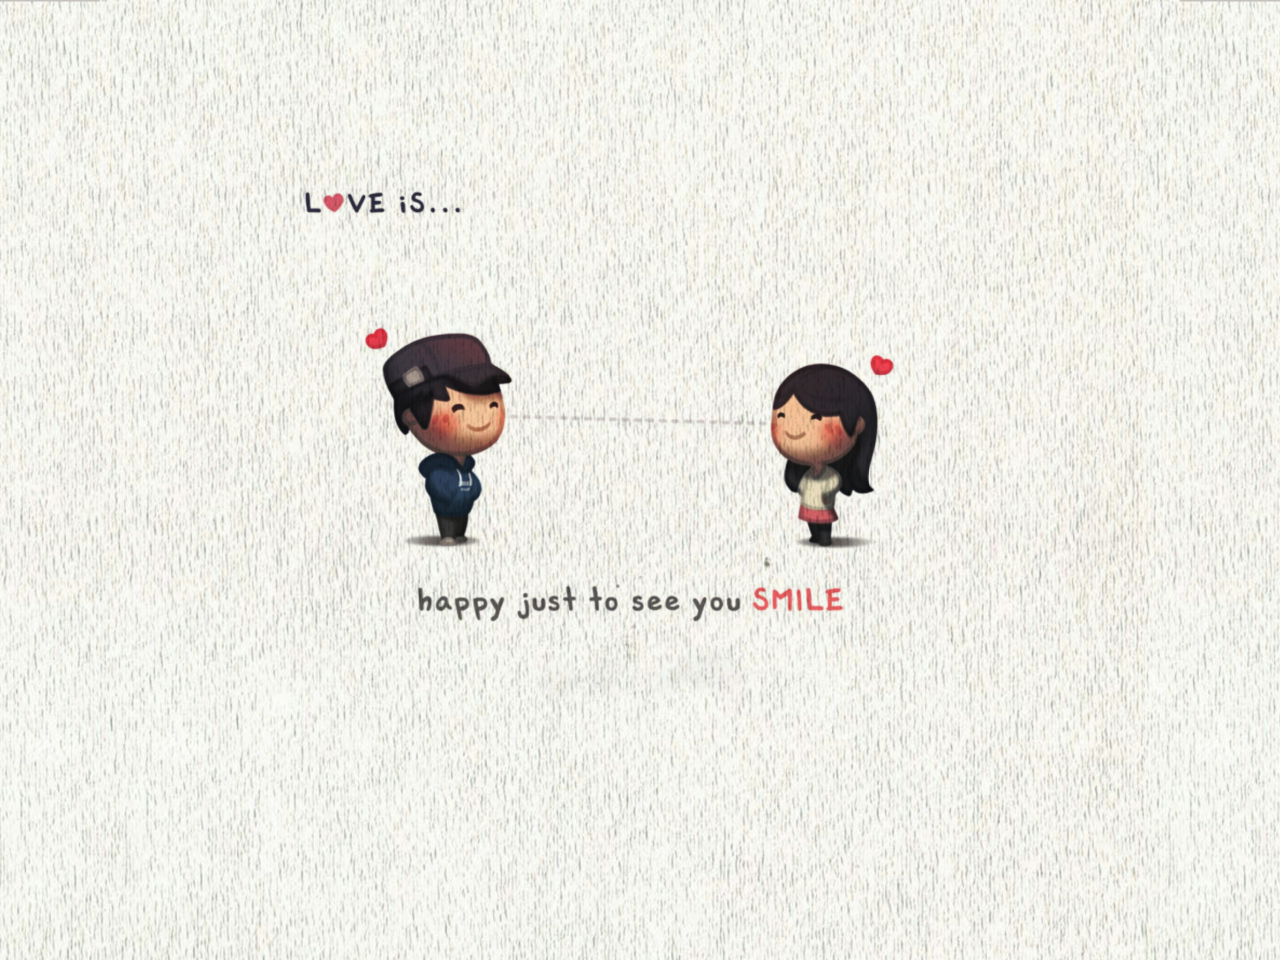 Love Is Happy Just To See You Smile wallpaper 1280x960